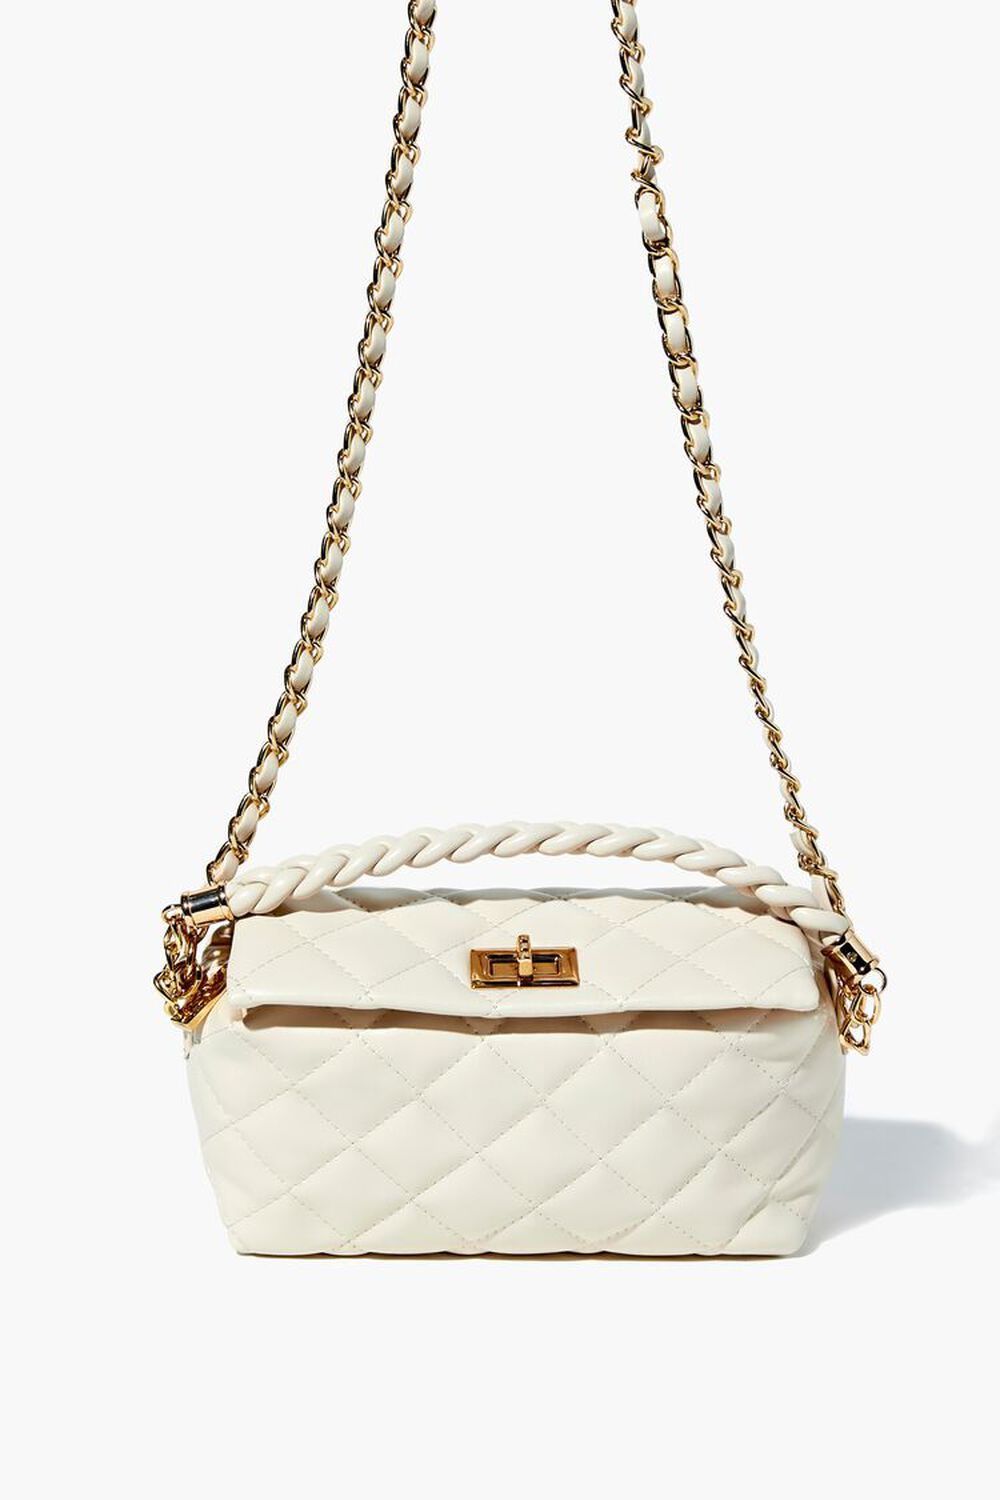 CREAM Twisted Faux Leather Crossbody Bag, image 1